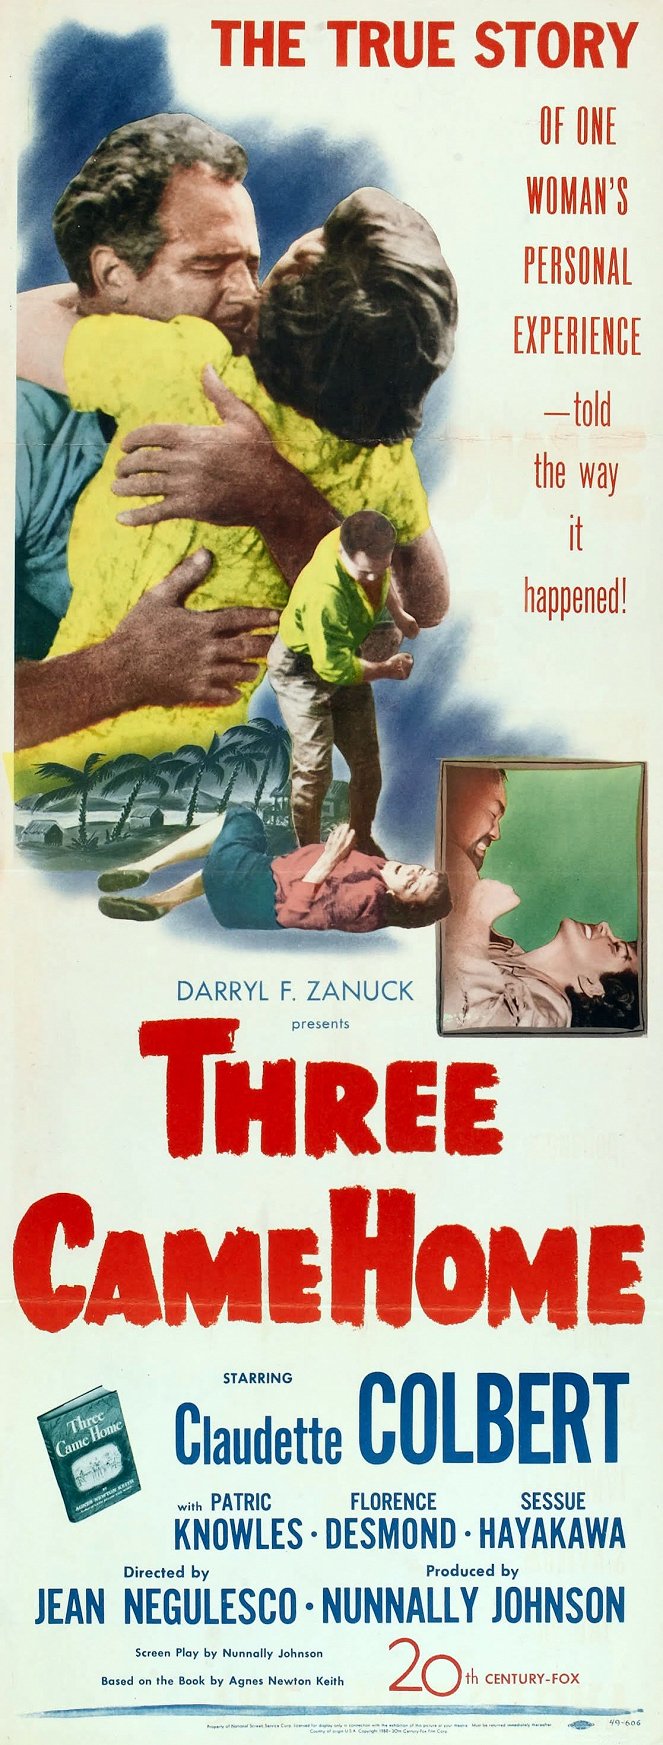 Three Came Home - Posters